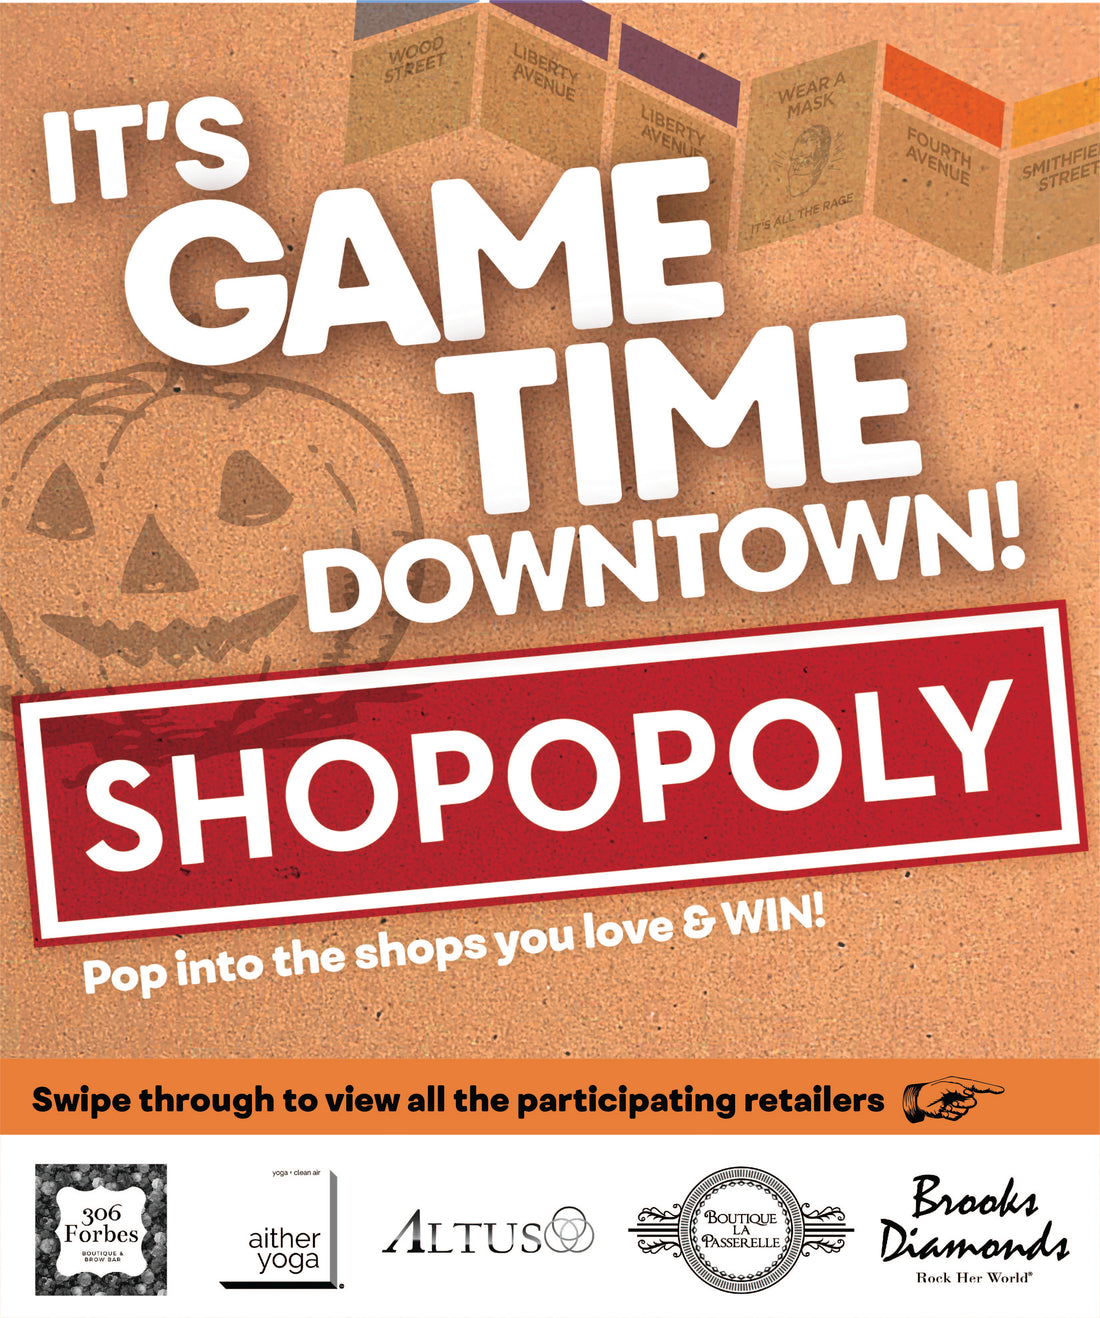 SHOPOPOLY IS BACK! SATURDAY OCTOBER 17